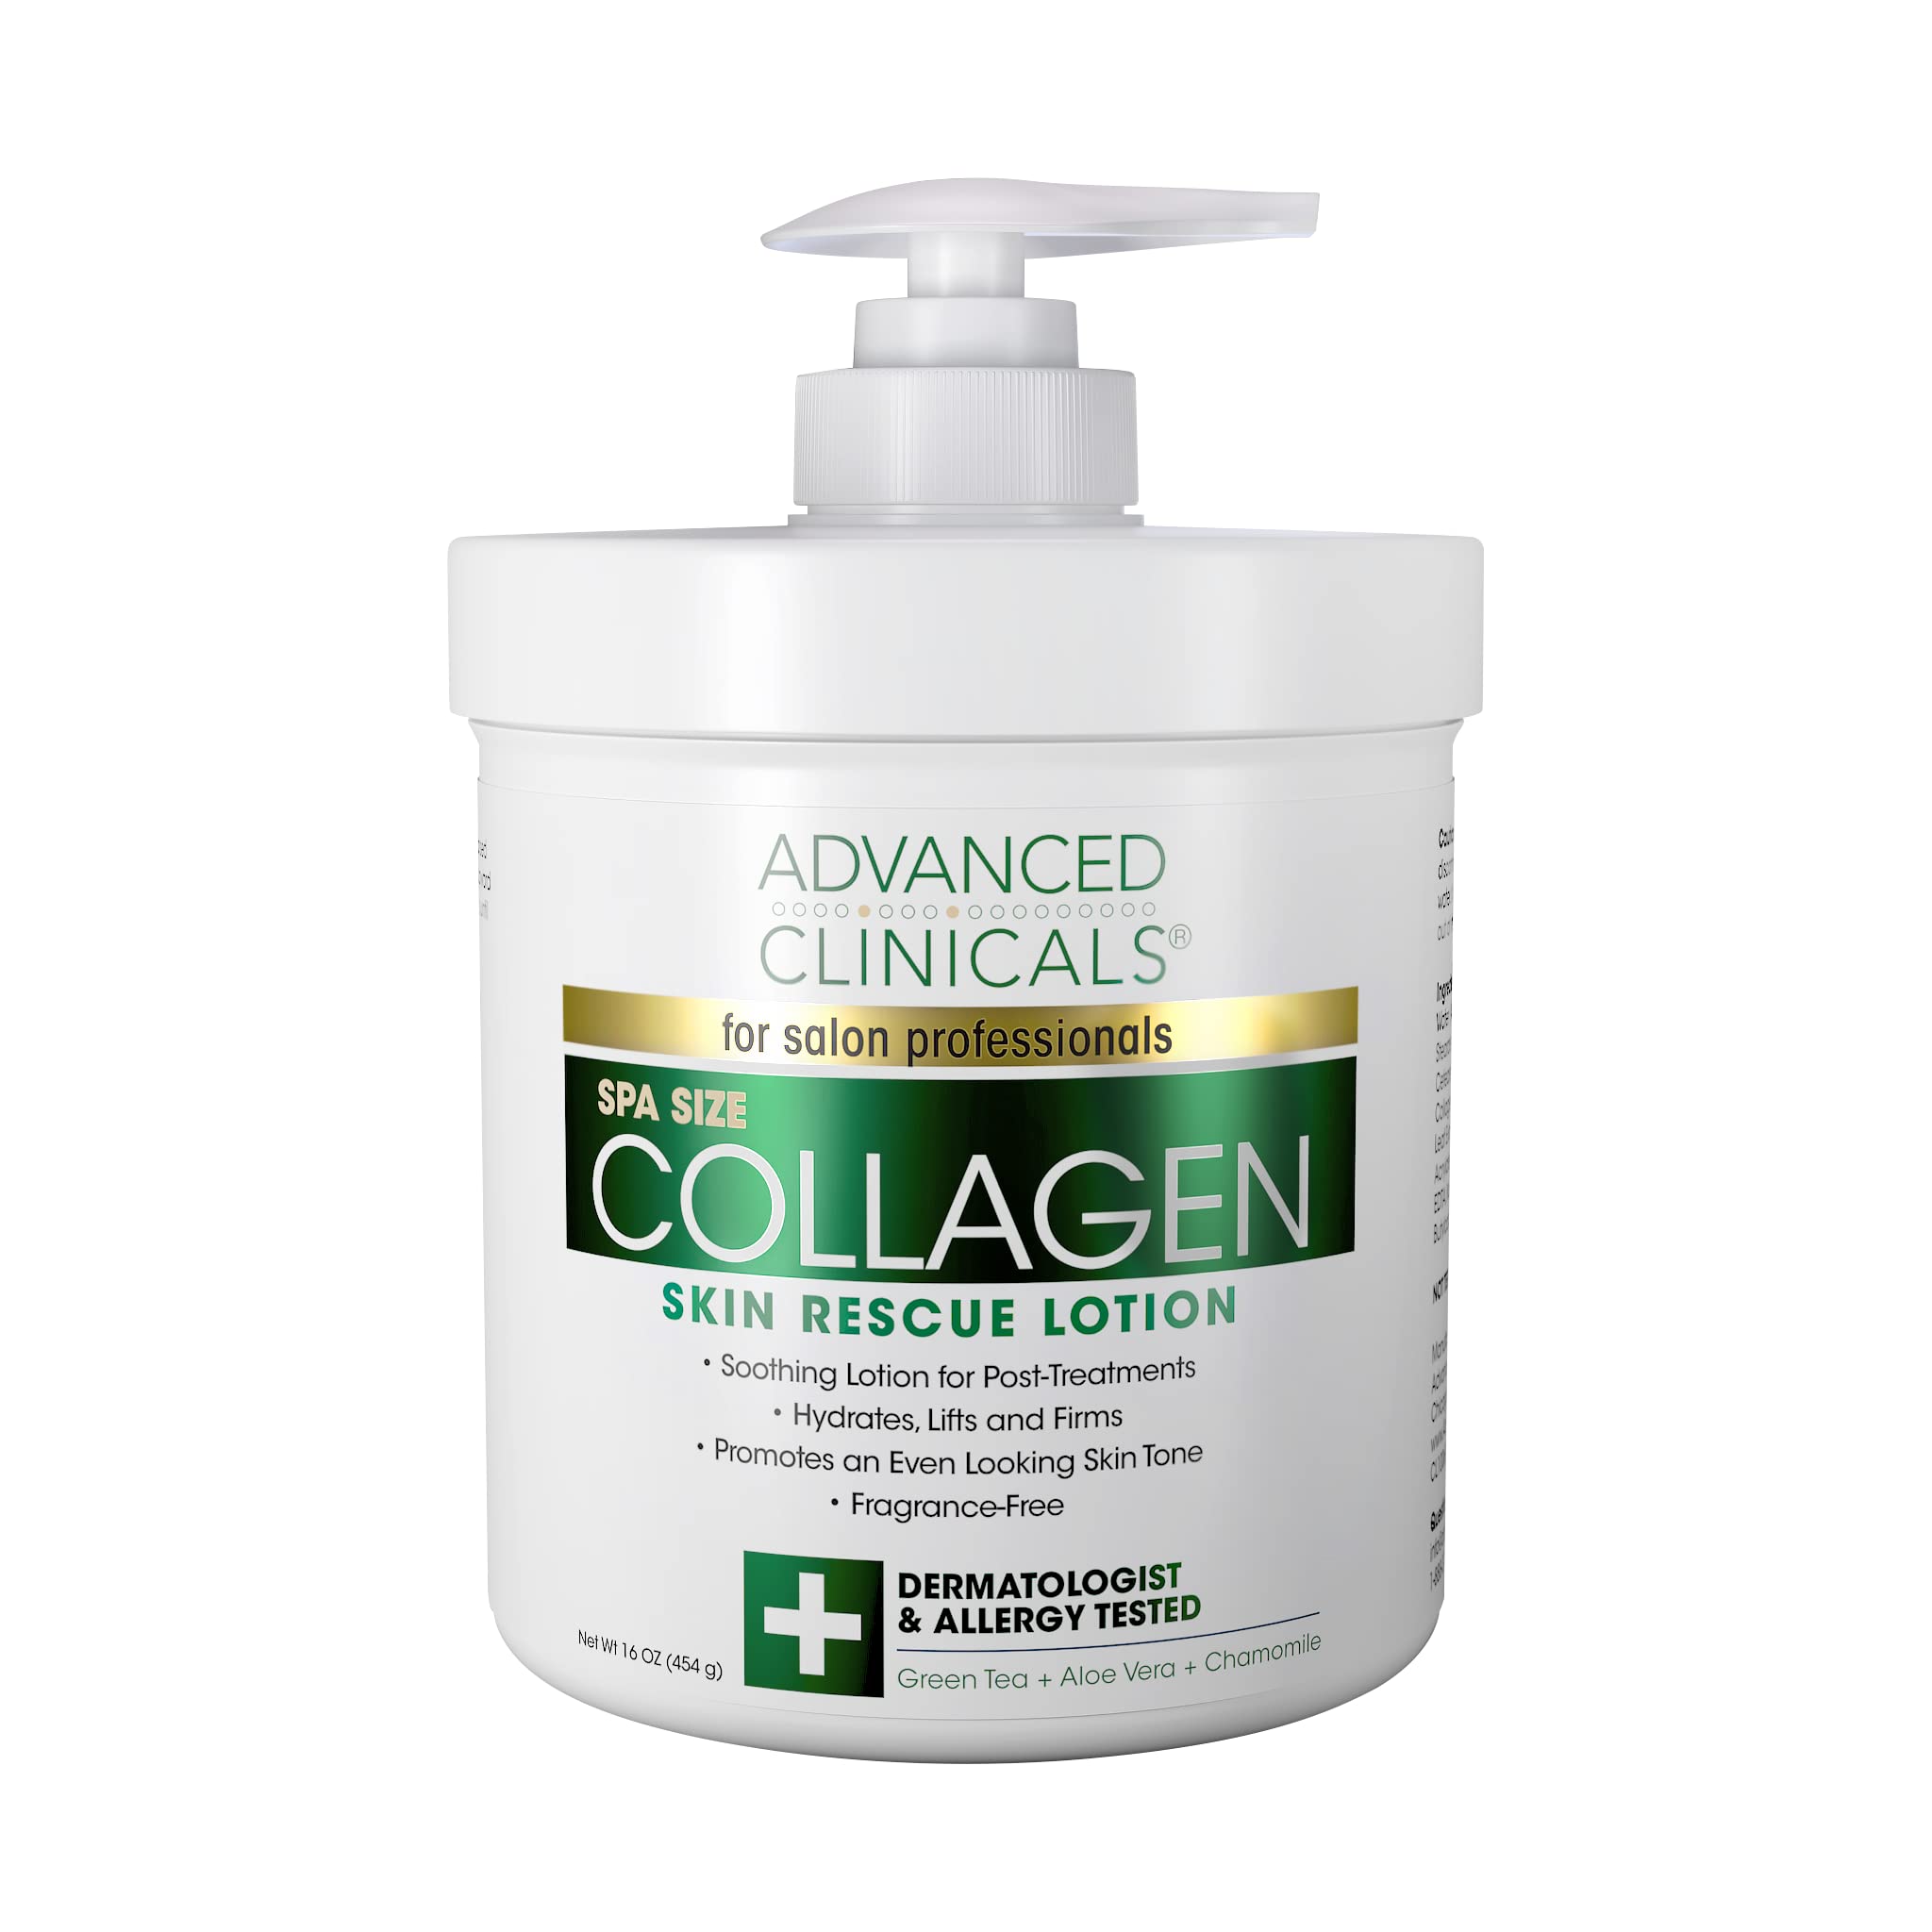 Book Cover Advanced Clinicals Collagen Skin Rescue Lotion - Hydrate, Moisturize, Lift, Firm. Great for Dry Skin. 16oz Jar with Pump. by Advanced Clinicals